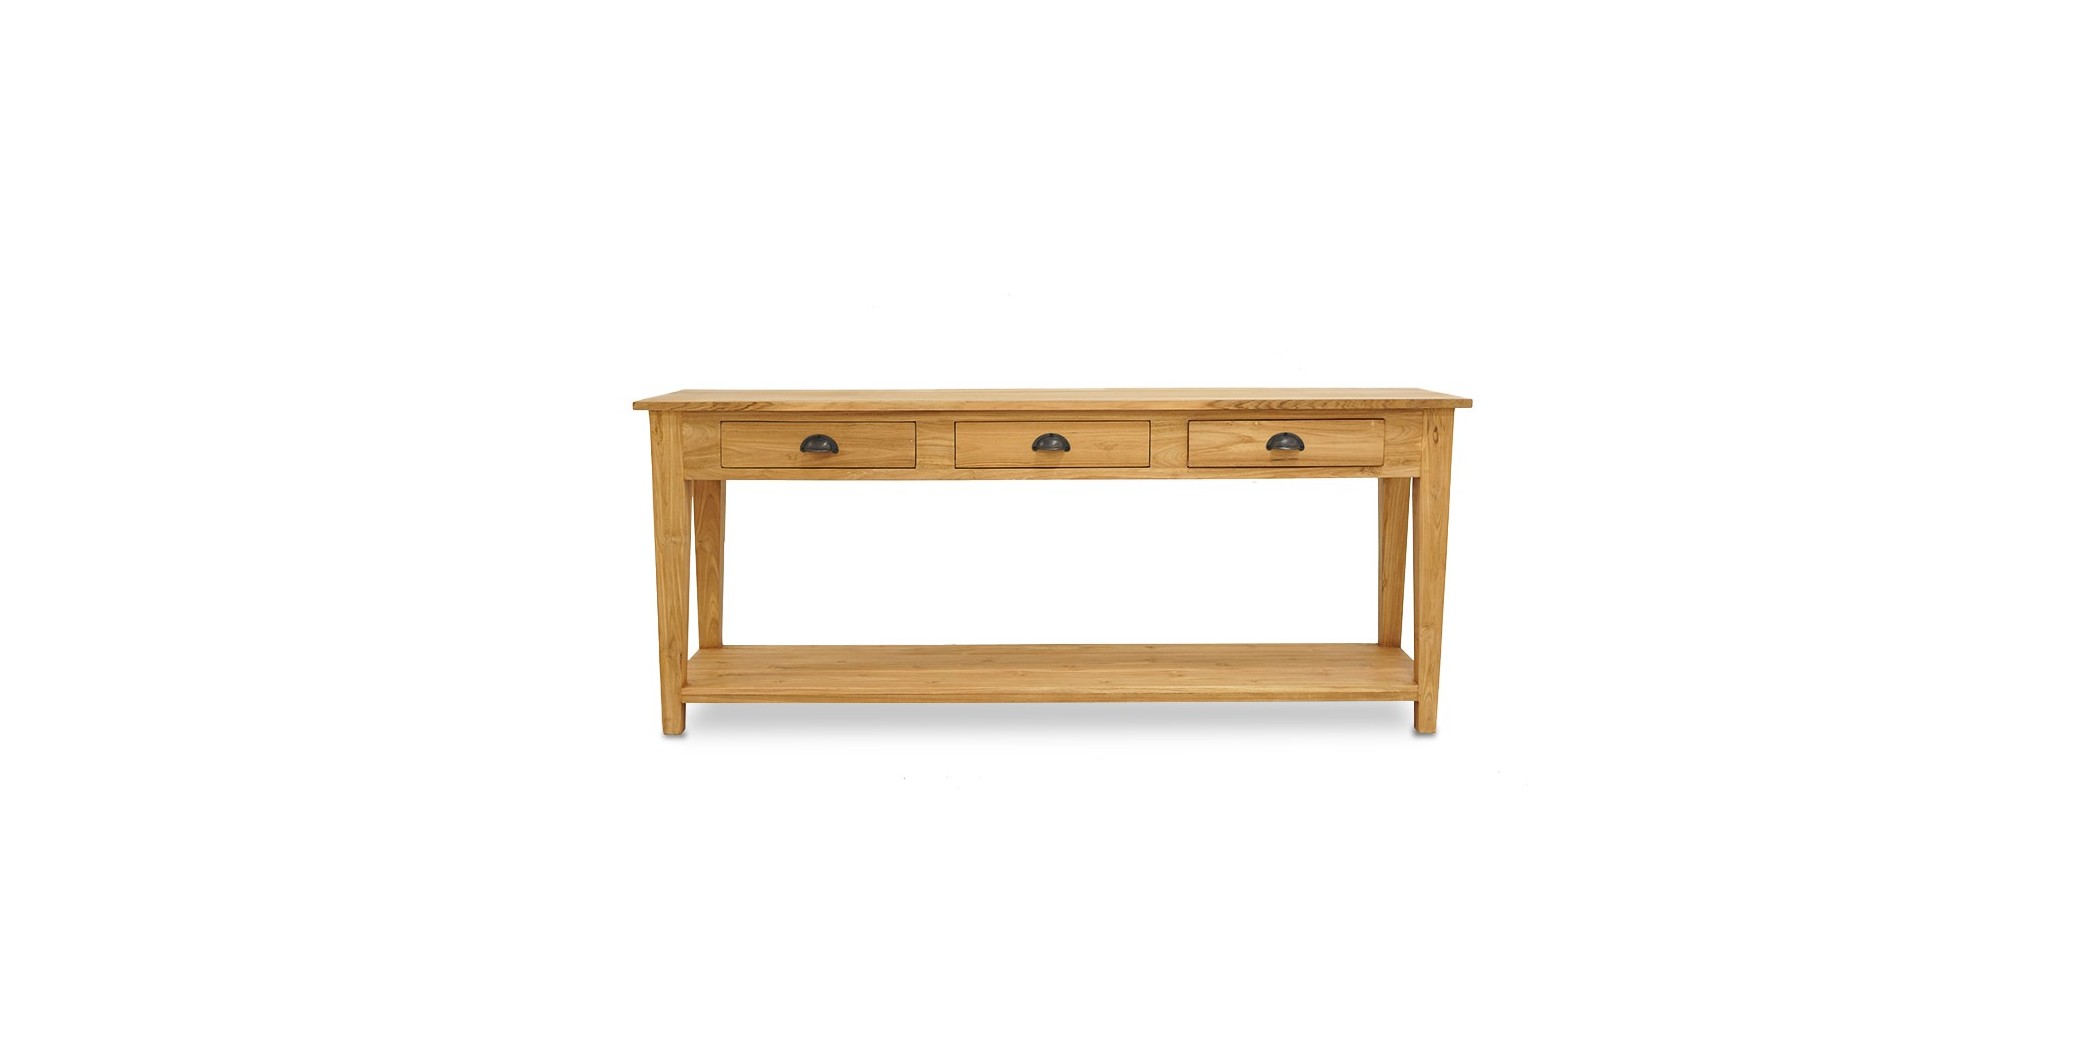 Parco Console Table W/3 Drawers In Teak